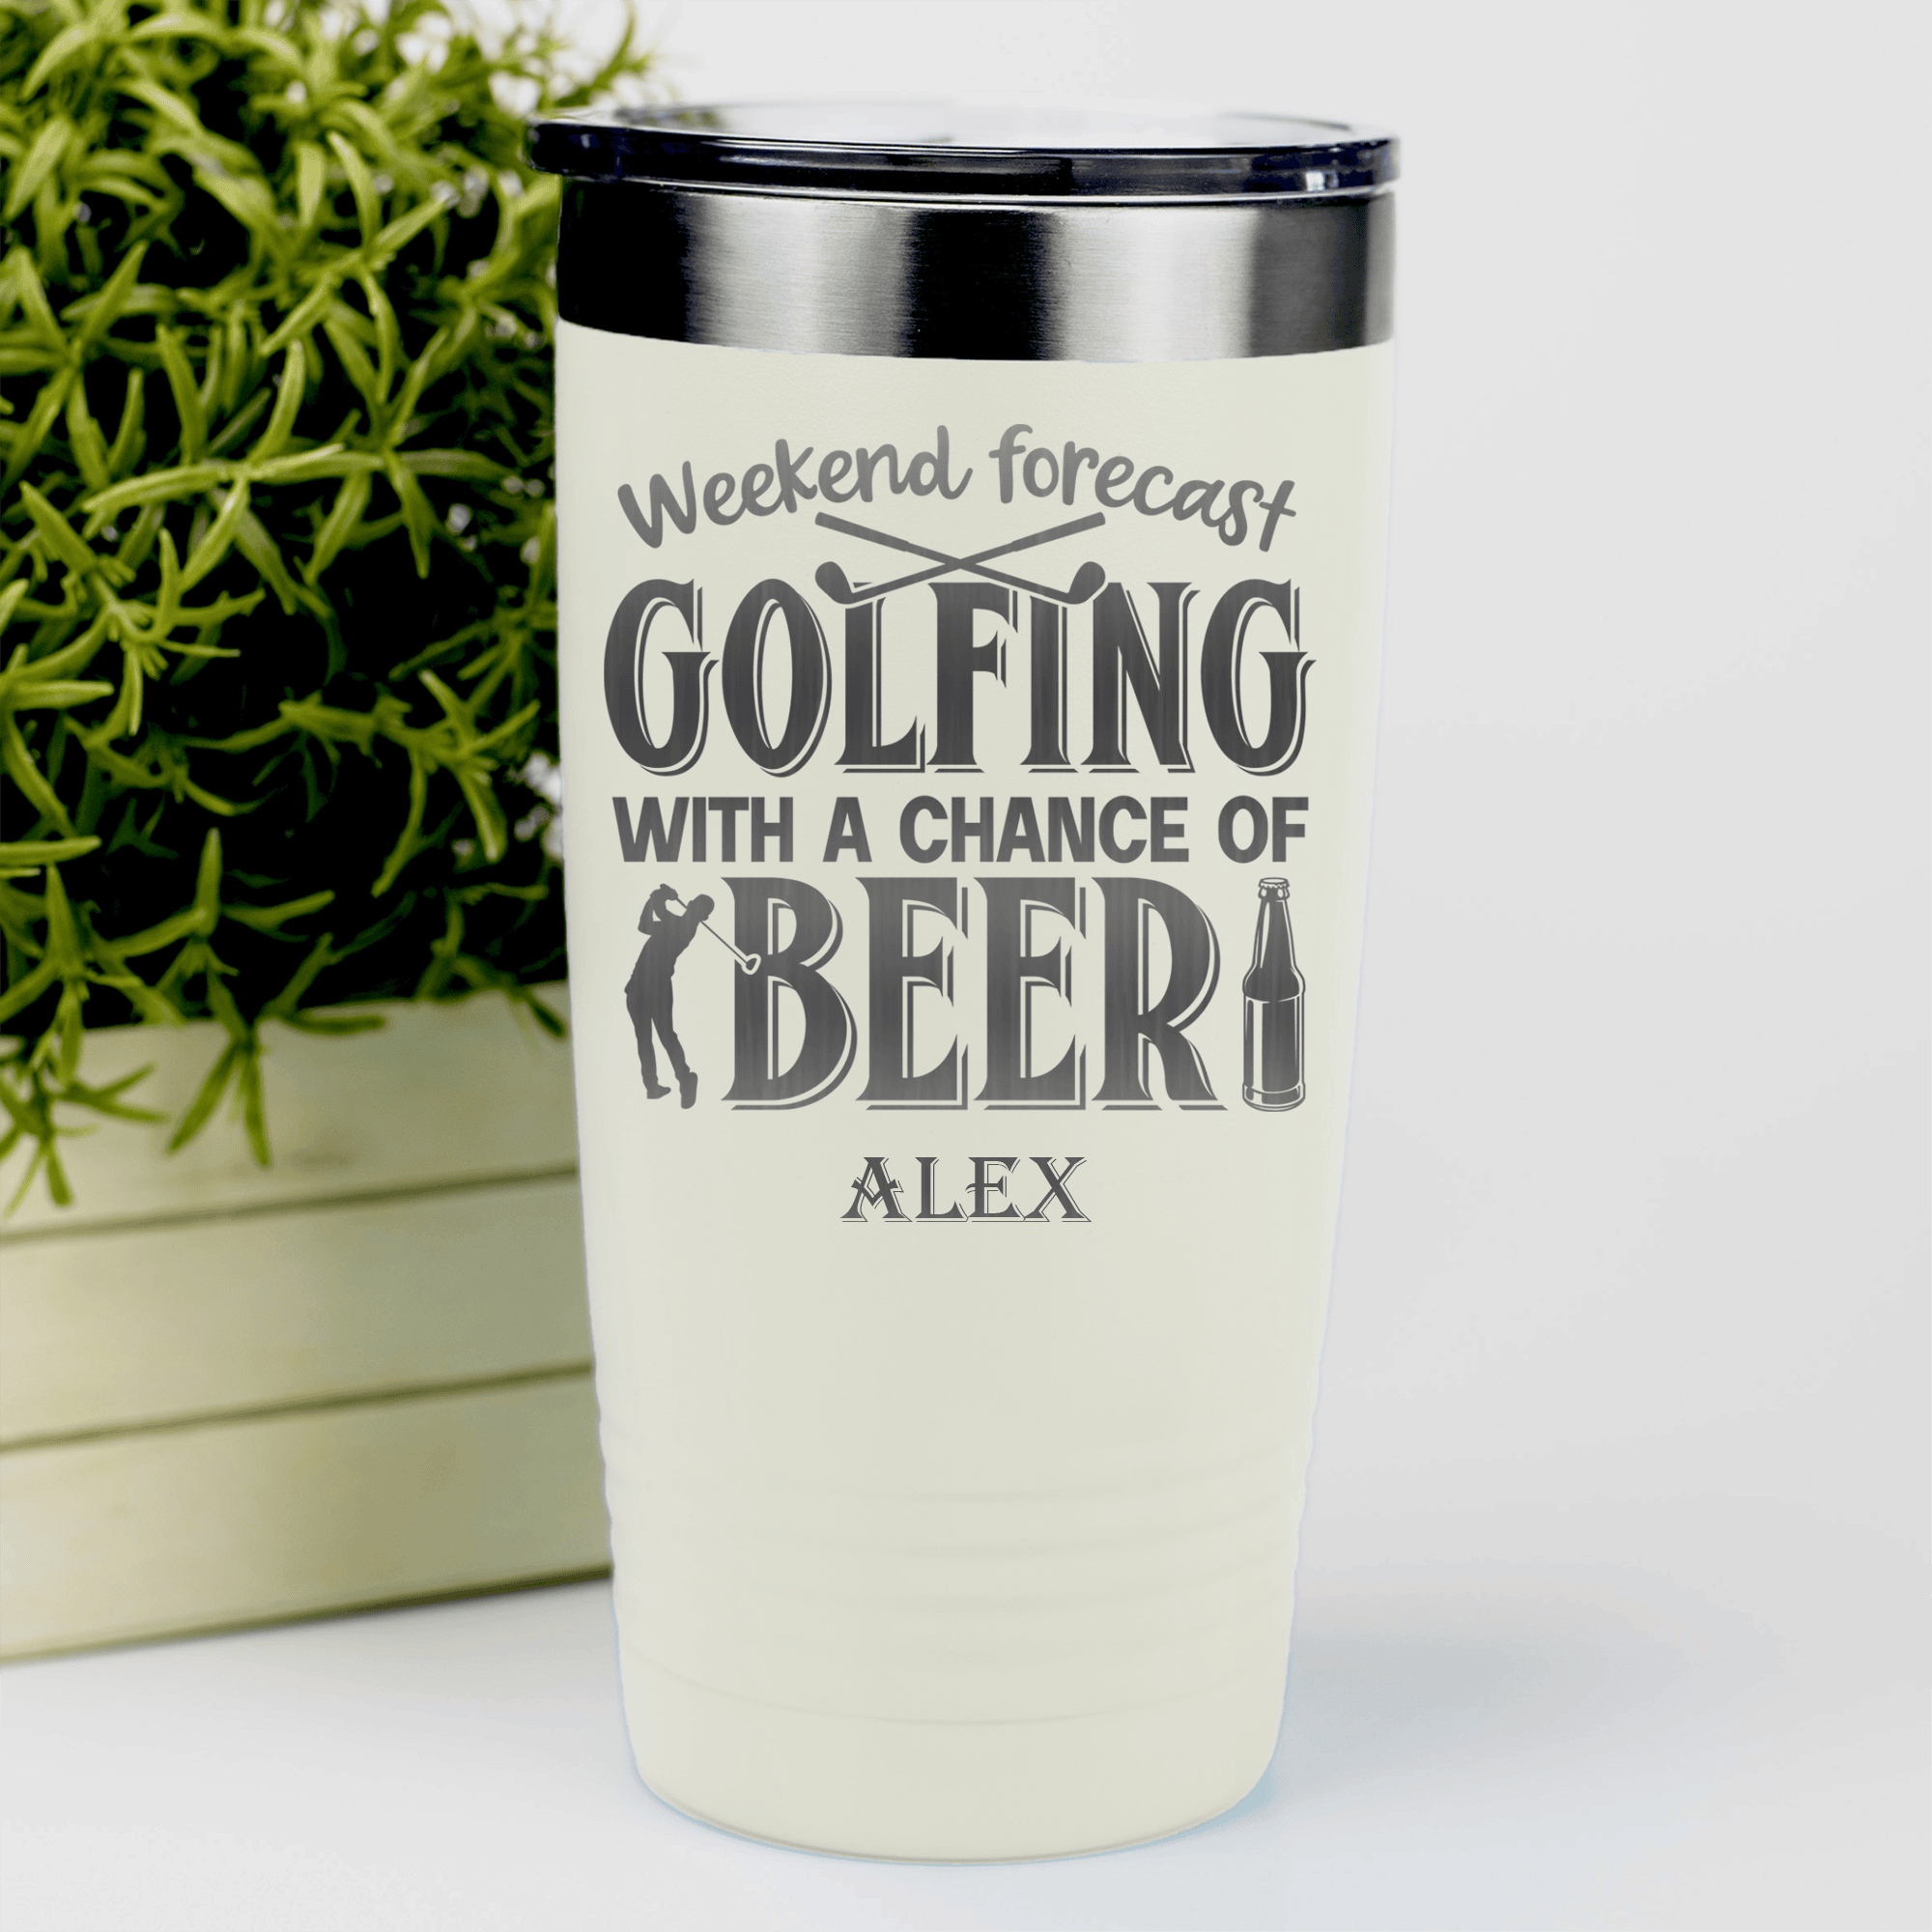 White Golf Tumbler With Weekend Forecast Golfing Design